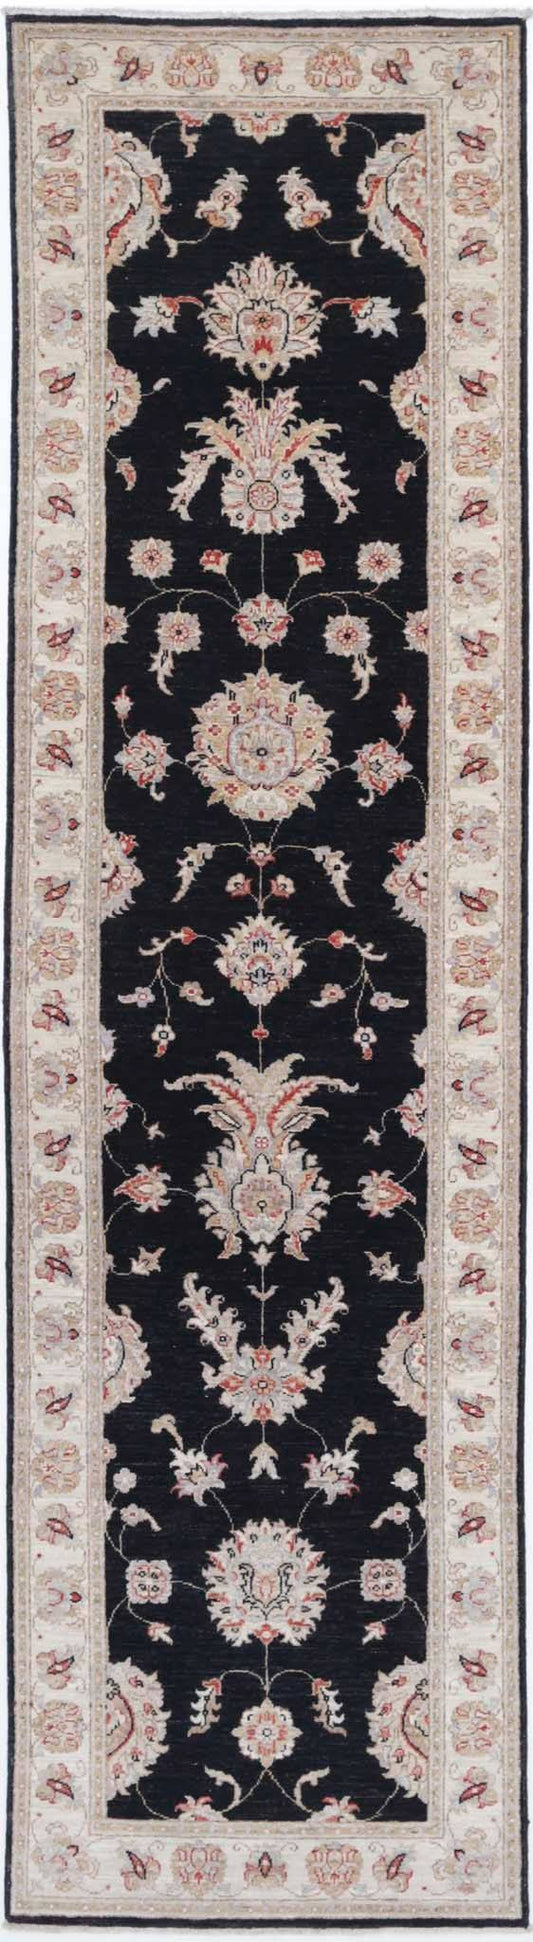 Traditional Hand Knotted Ziegler Farhan Wool Rug of Size 2'6'' X 10'0'' in Black and Ivory Colors - Made in Afghanistan